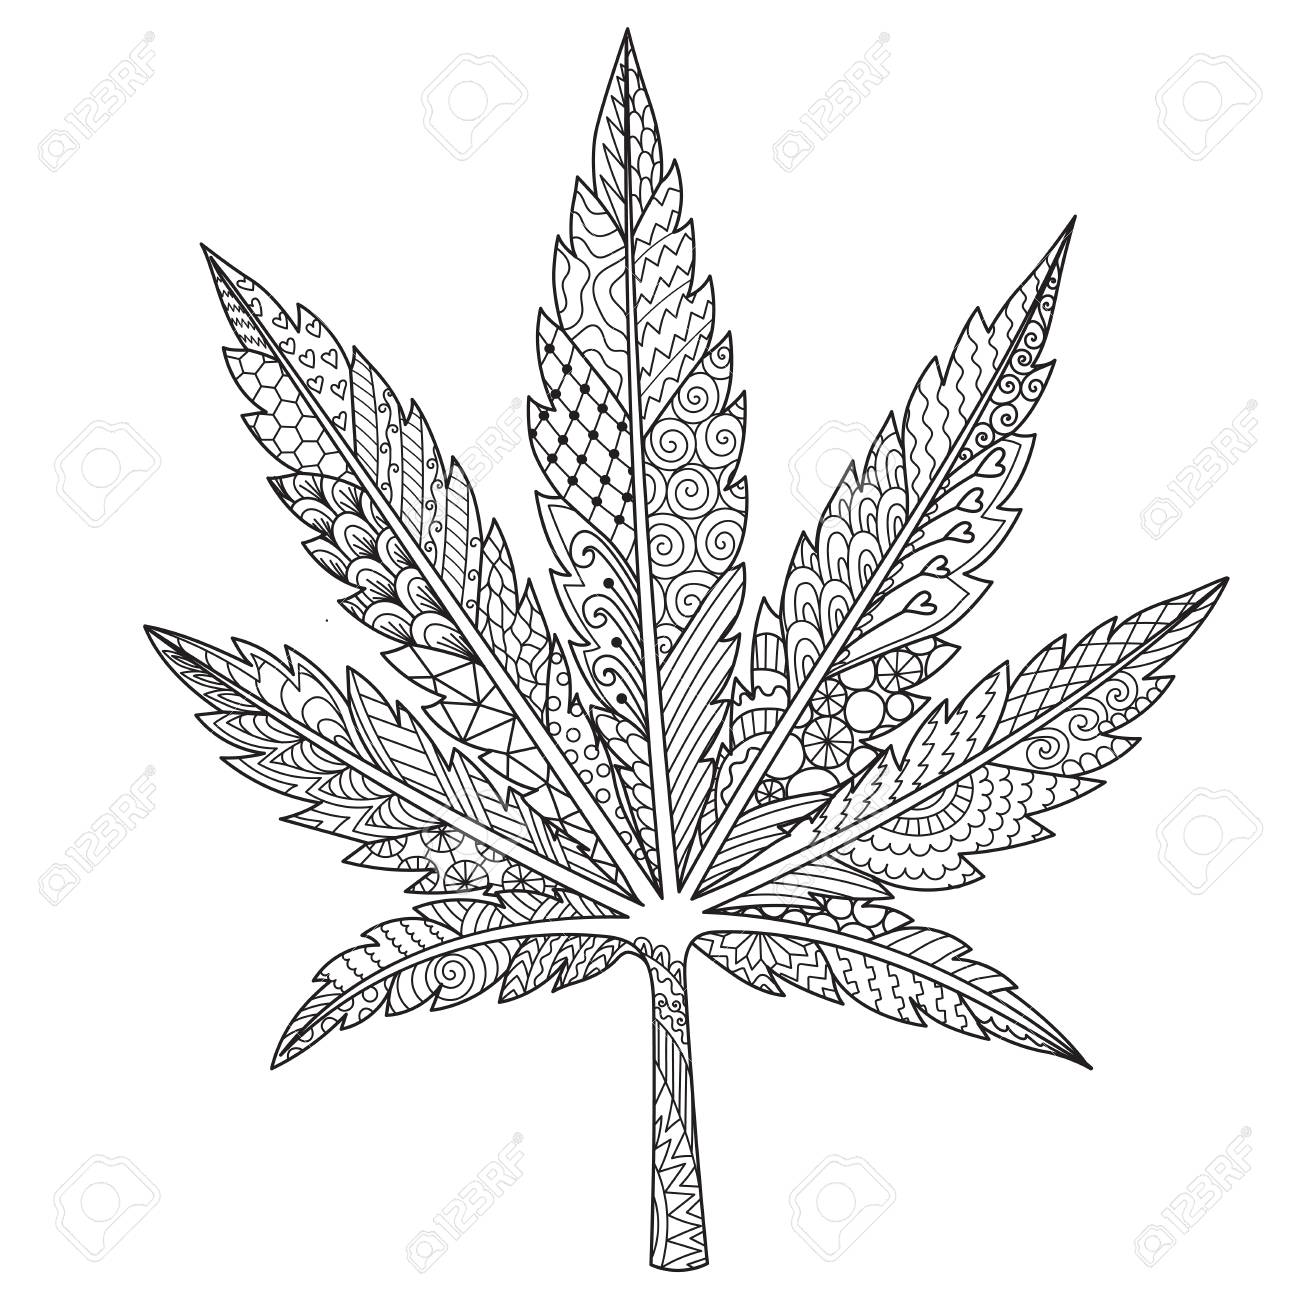 Line art in marijuanacannabis leaf or weed for adult coloring bookcoloring page print on product and other design element vector illustration royalty free svg cliparts vectors and stock illustration image